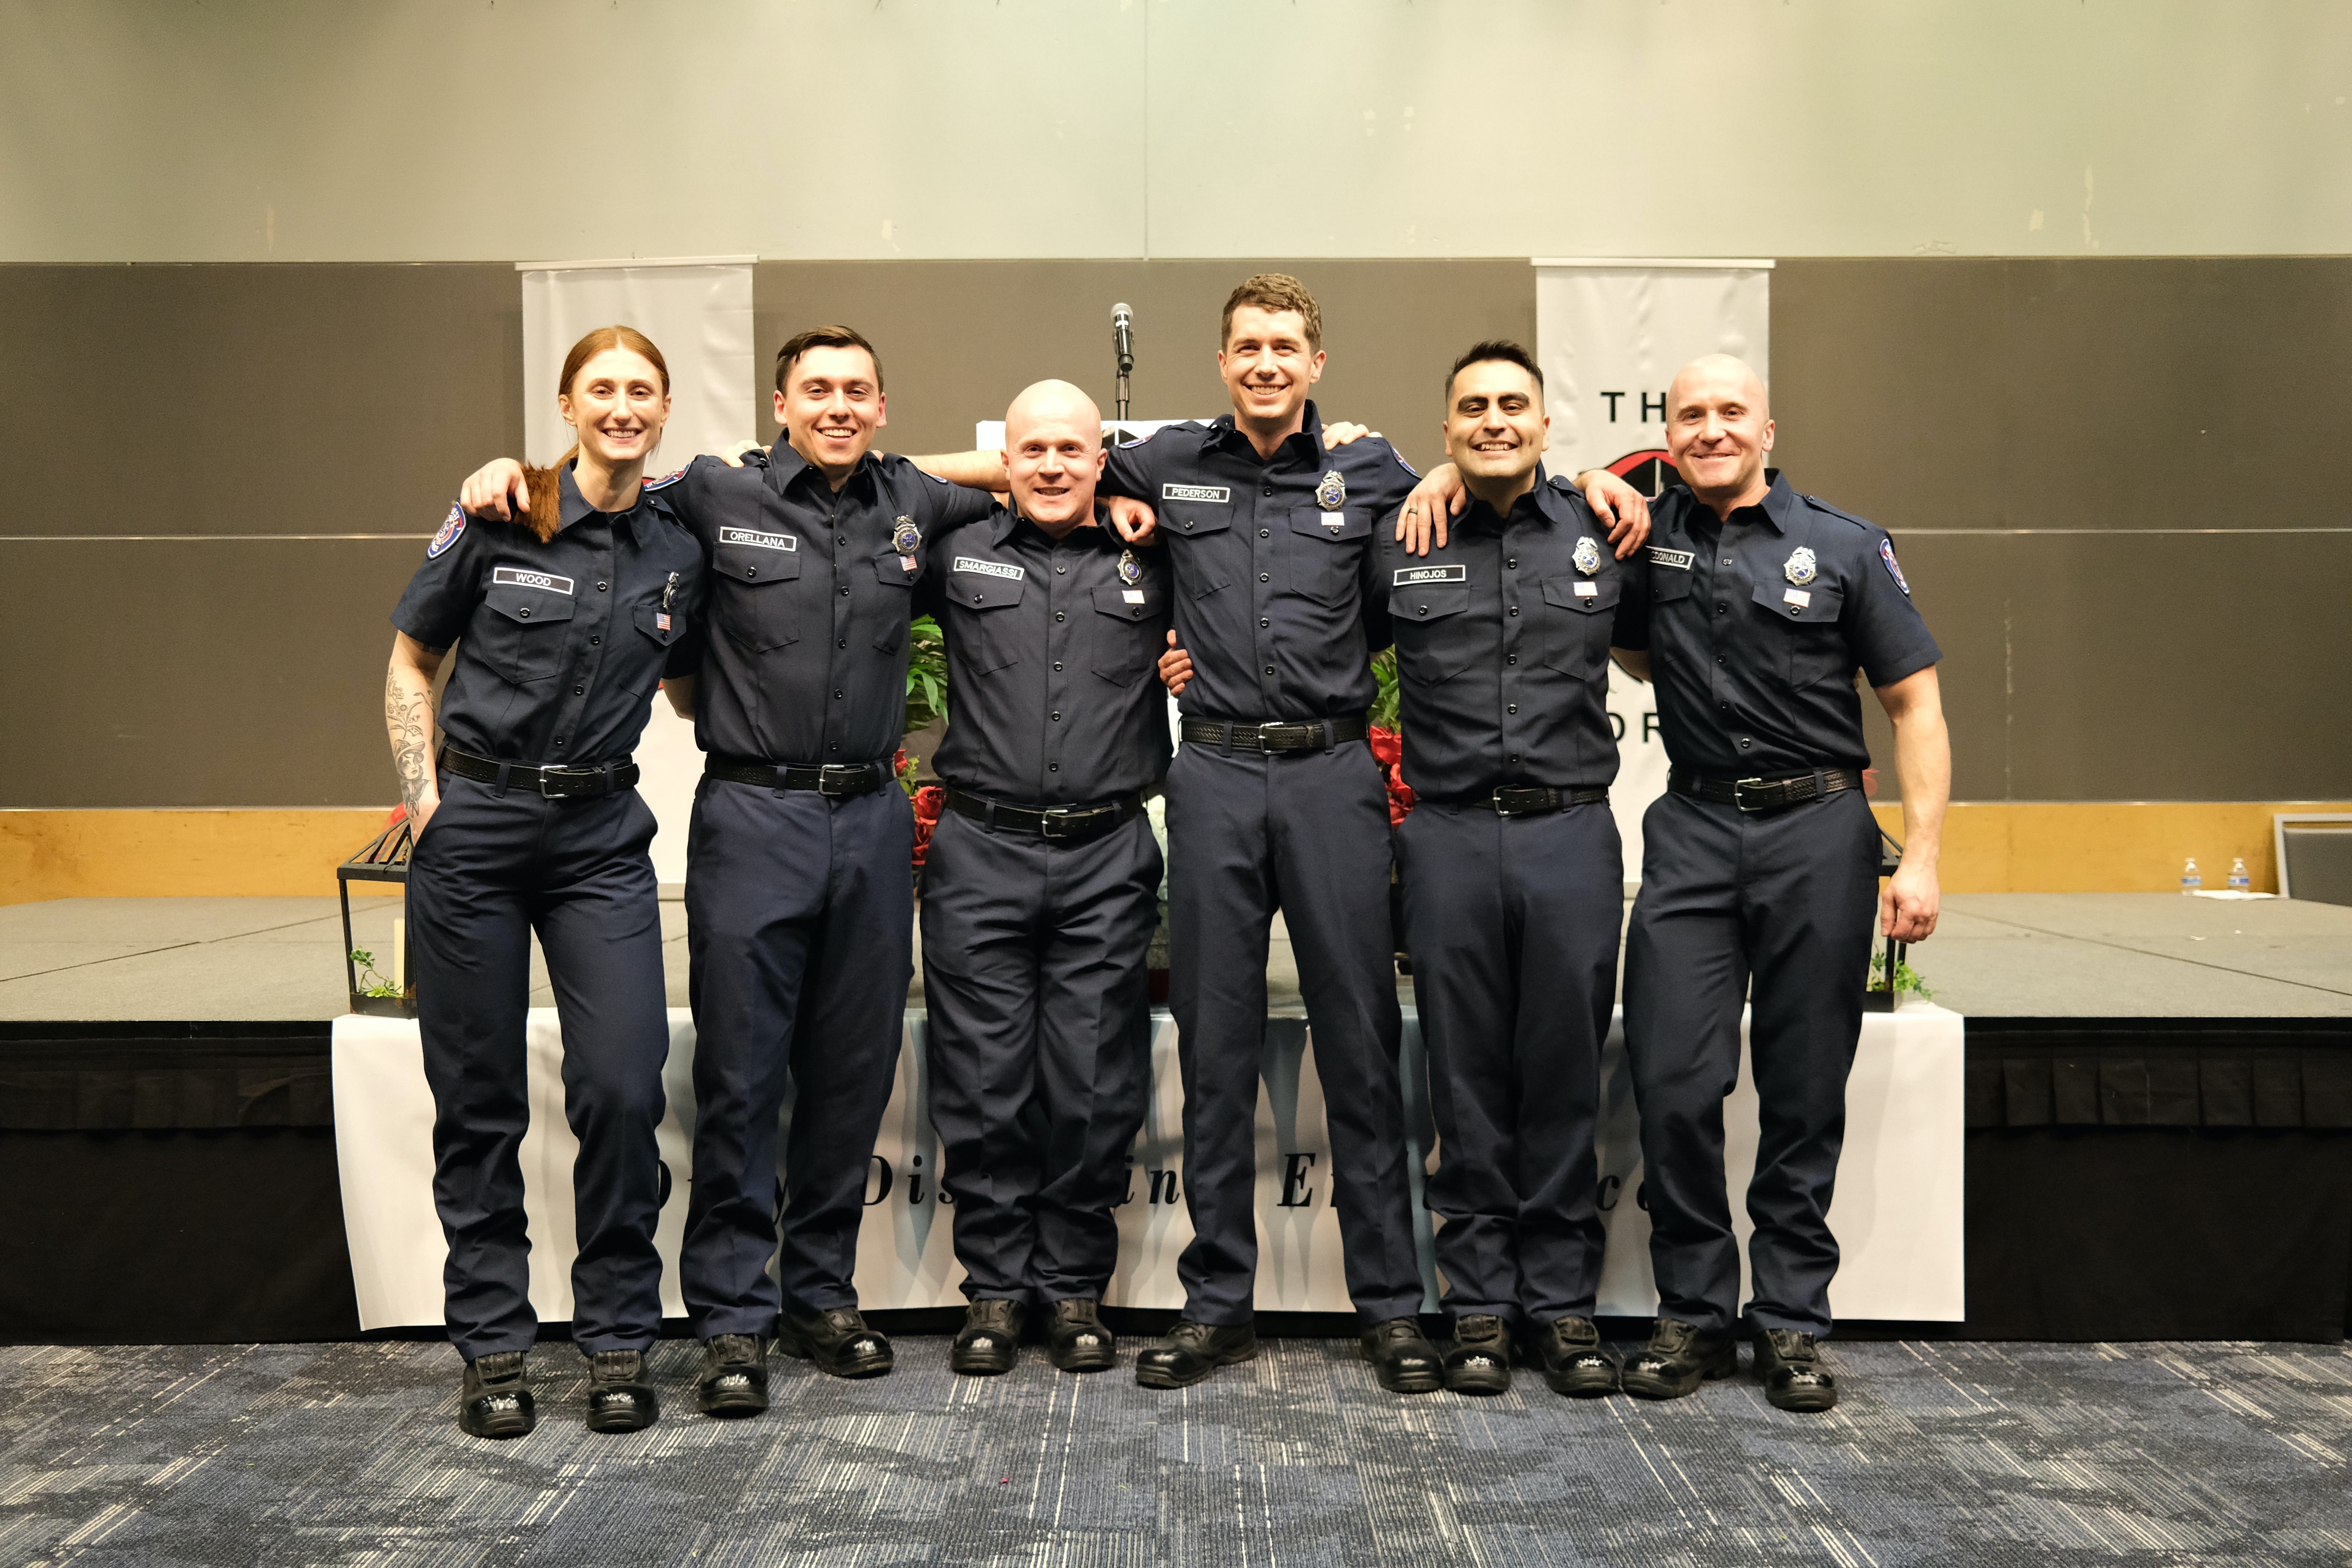 six firefighters standing together in uniform